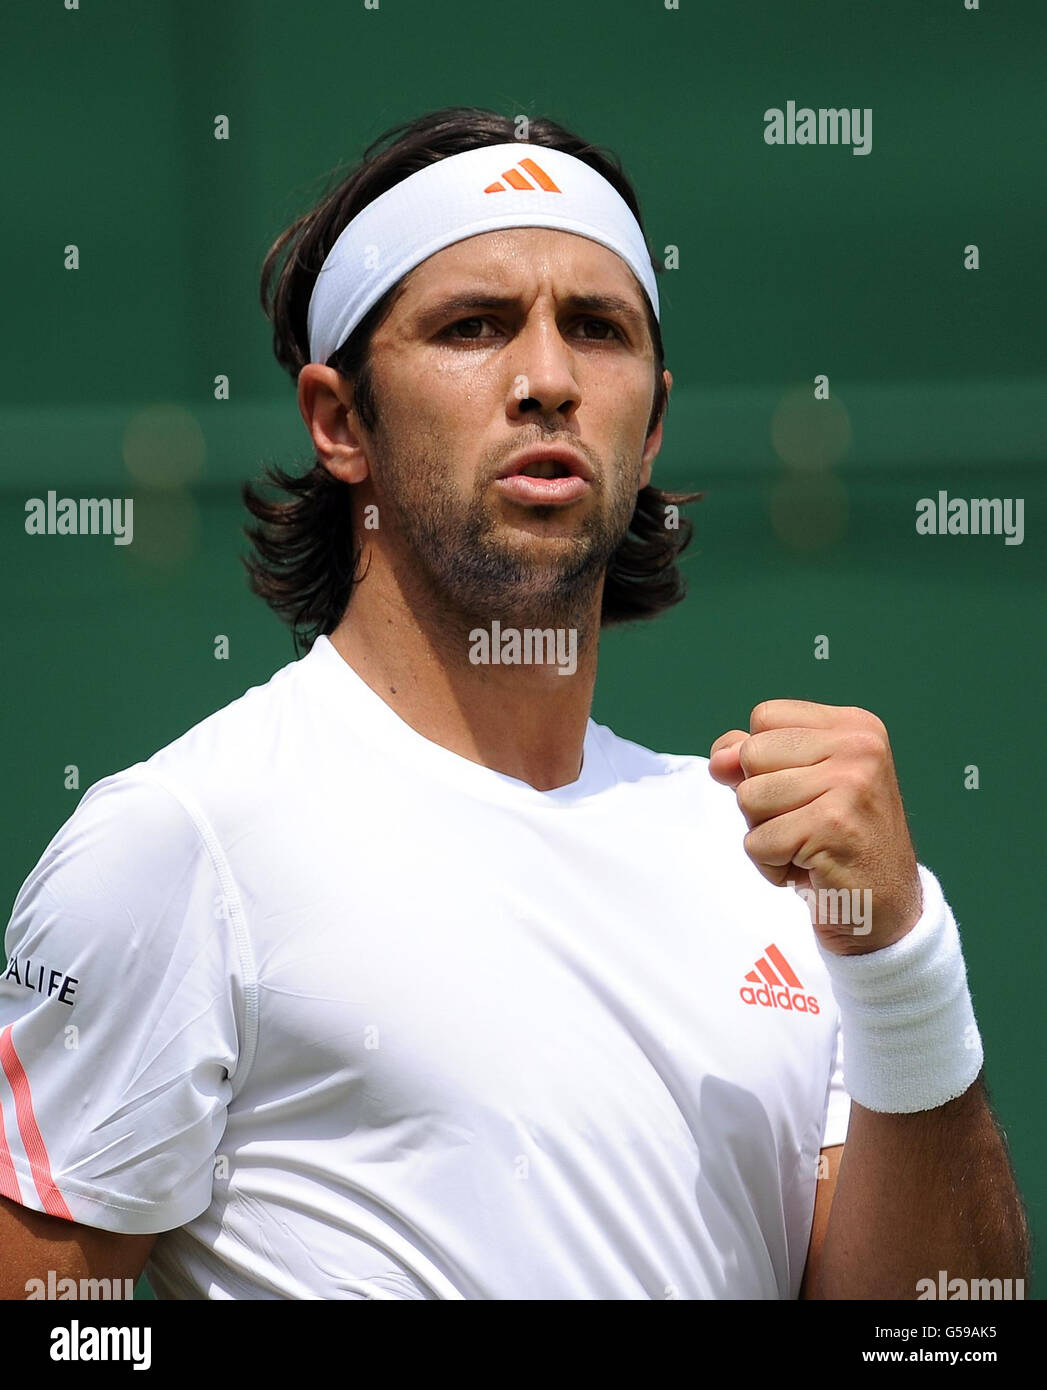 Spain's Fernando Verdasco celebrates against Jimmy Wang during day one of the 2012 Wimbledon Championships at the All England Lawn Tennis Club, Wimbledon. Stock Photo